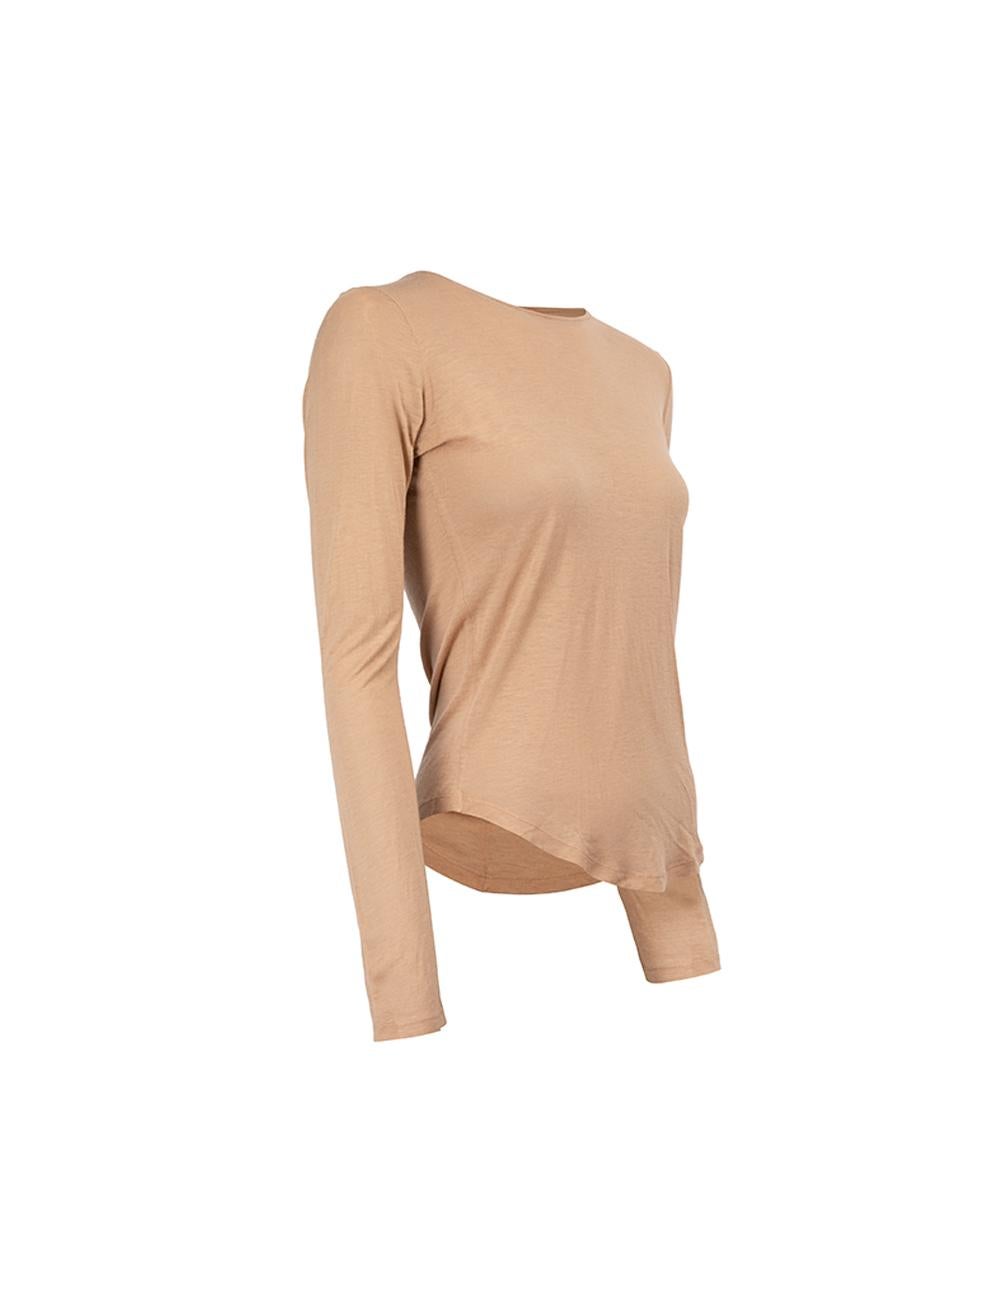 CONDITION is Very good. Hardly any visible wear to top is evident on this used Stella McCartney designer resale item. 



Details


Nude

Cotton

Long sleeves top

Round neckline

Back zip closure





Made in Portugal



Composition

NO COMPOSITION